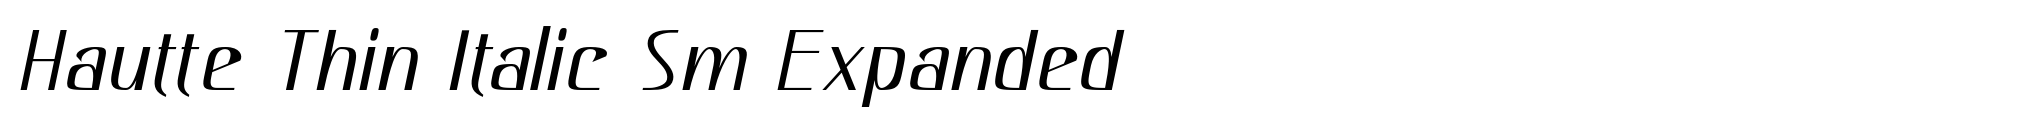 Hautte Thin Italic Sm Expanded image